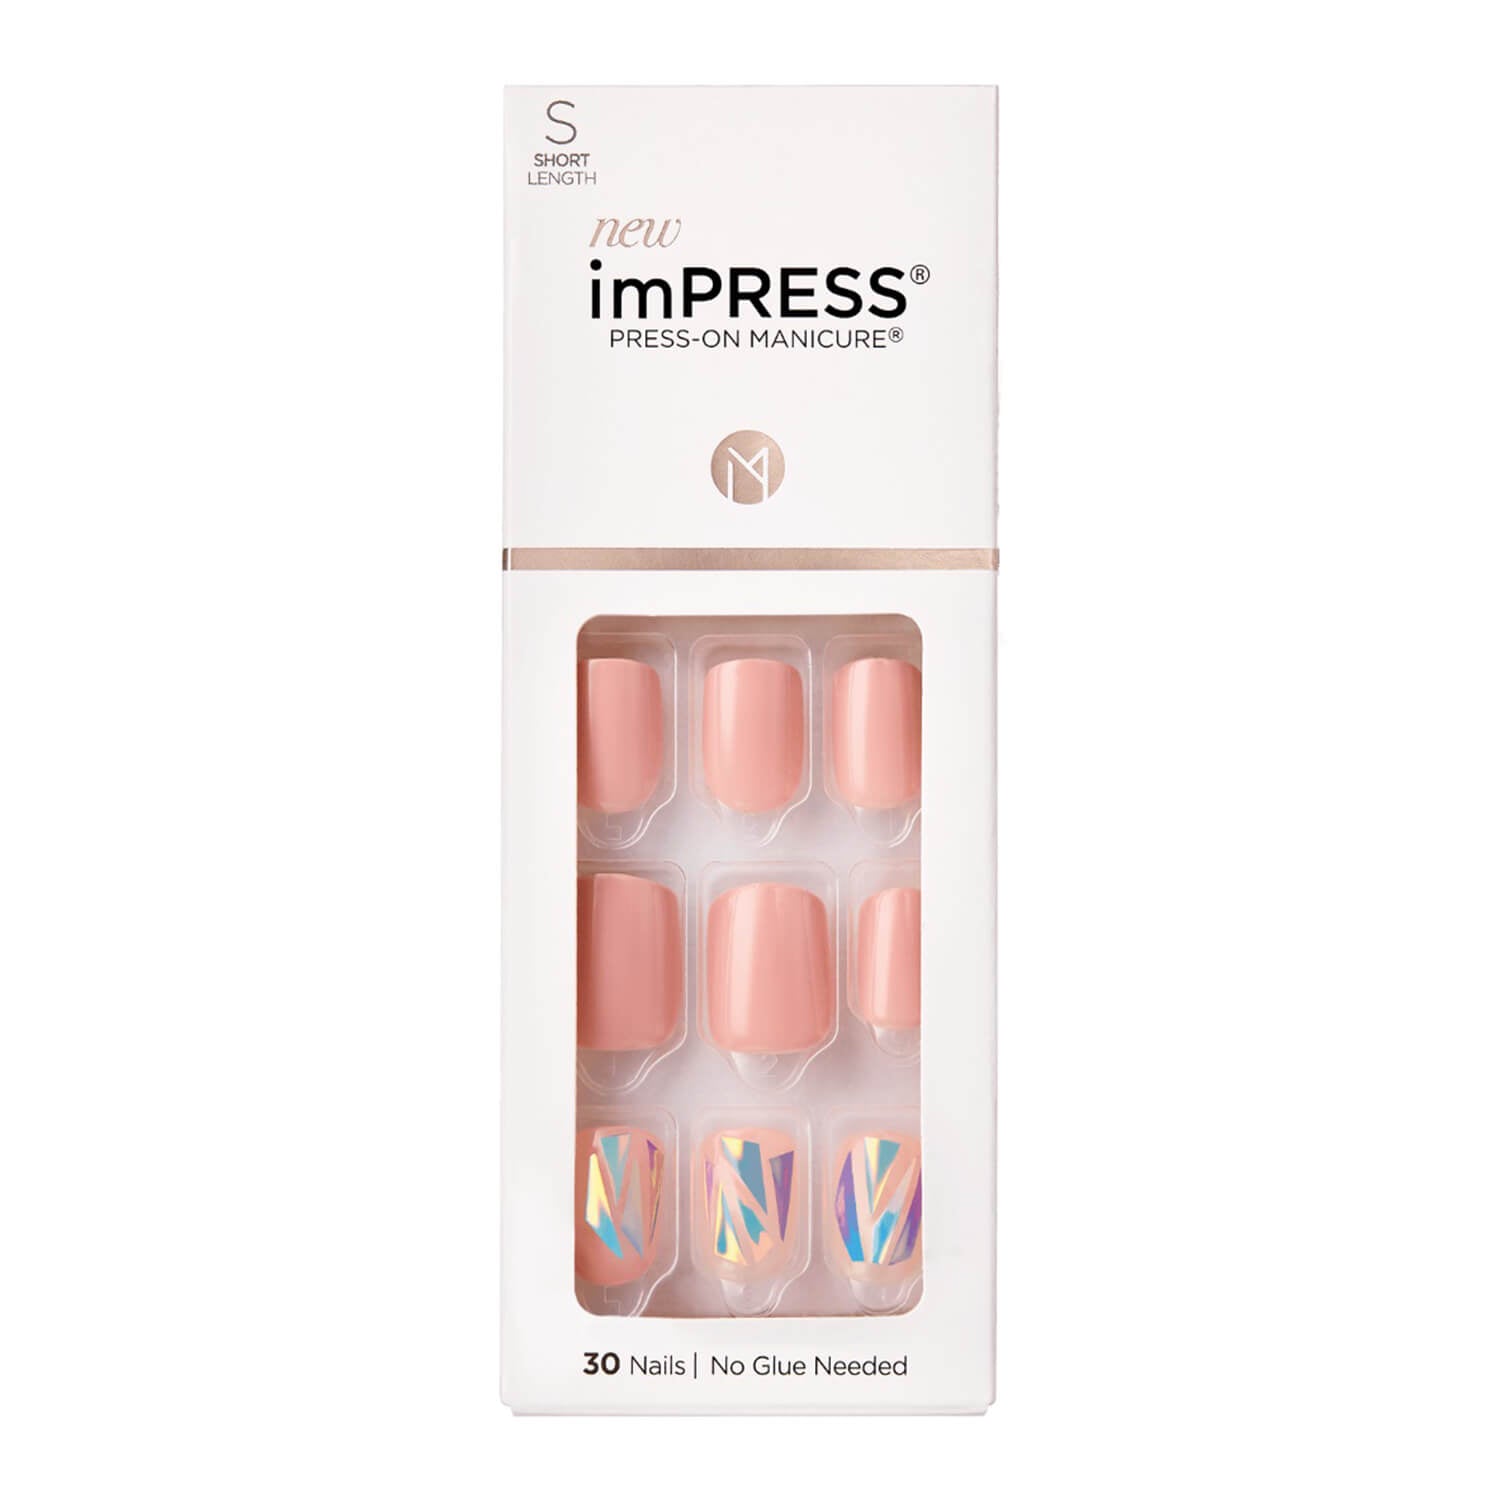 Press-on nails available at heygil.pk for delivery in Pakistan.